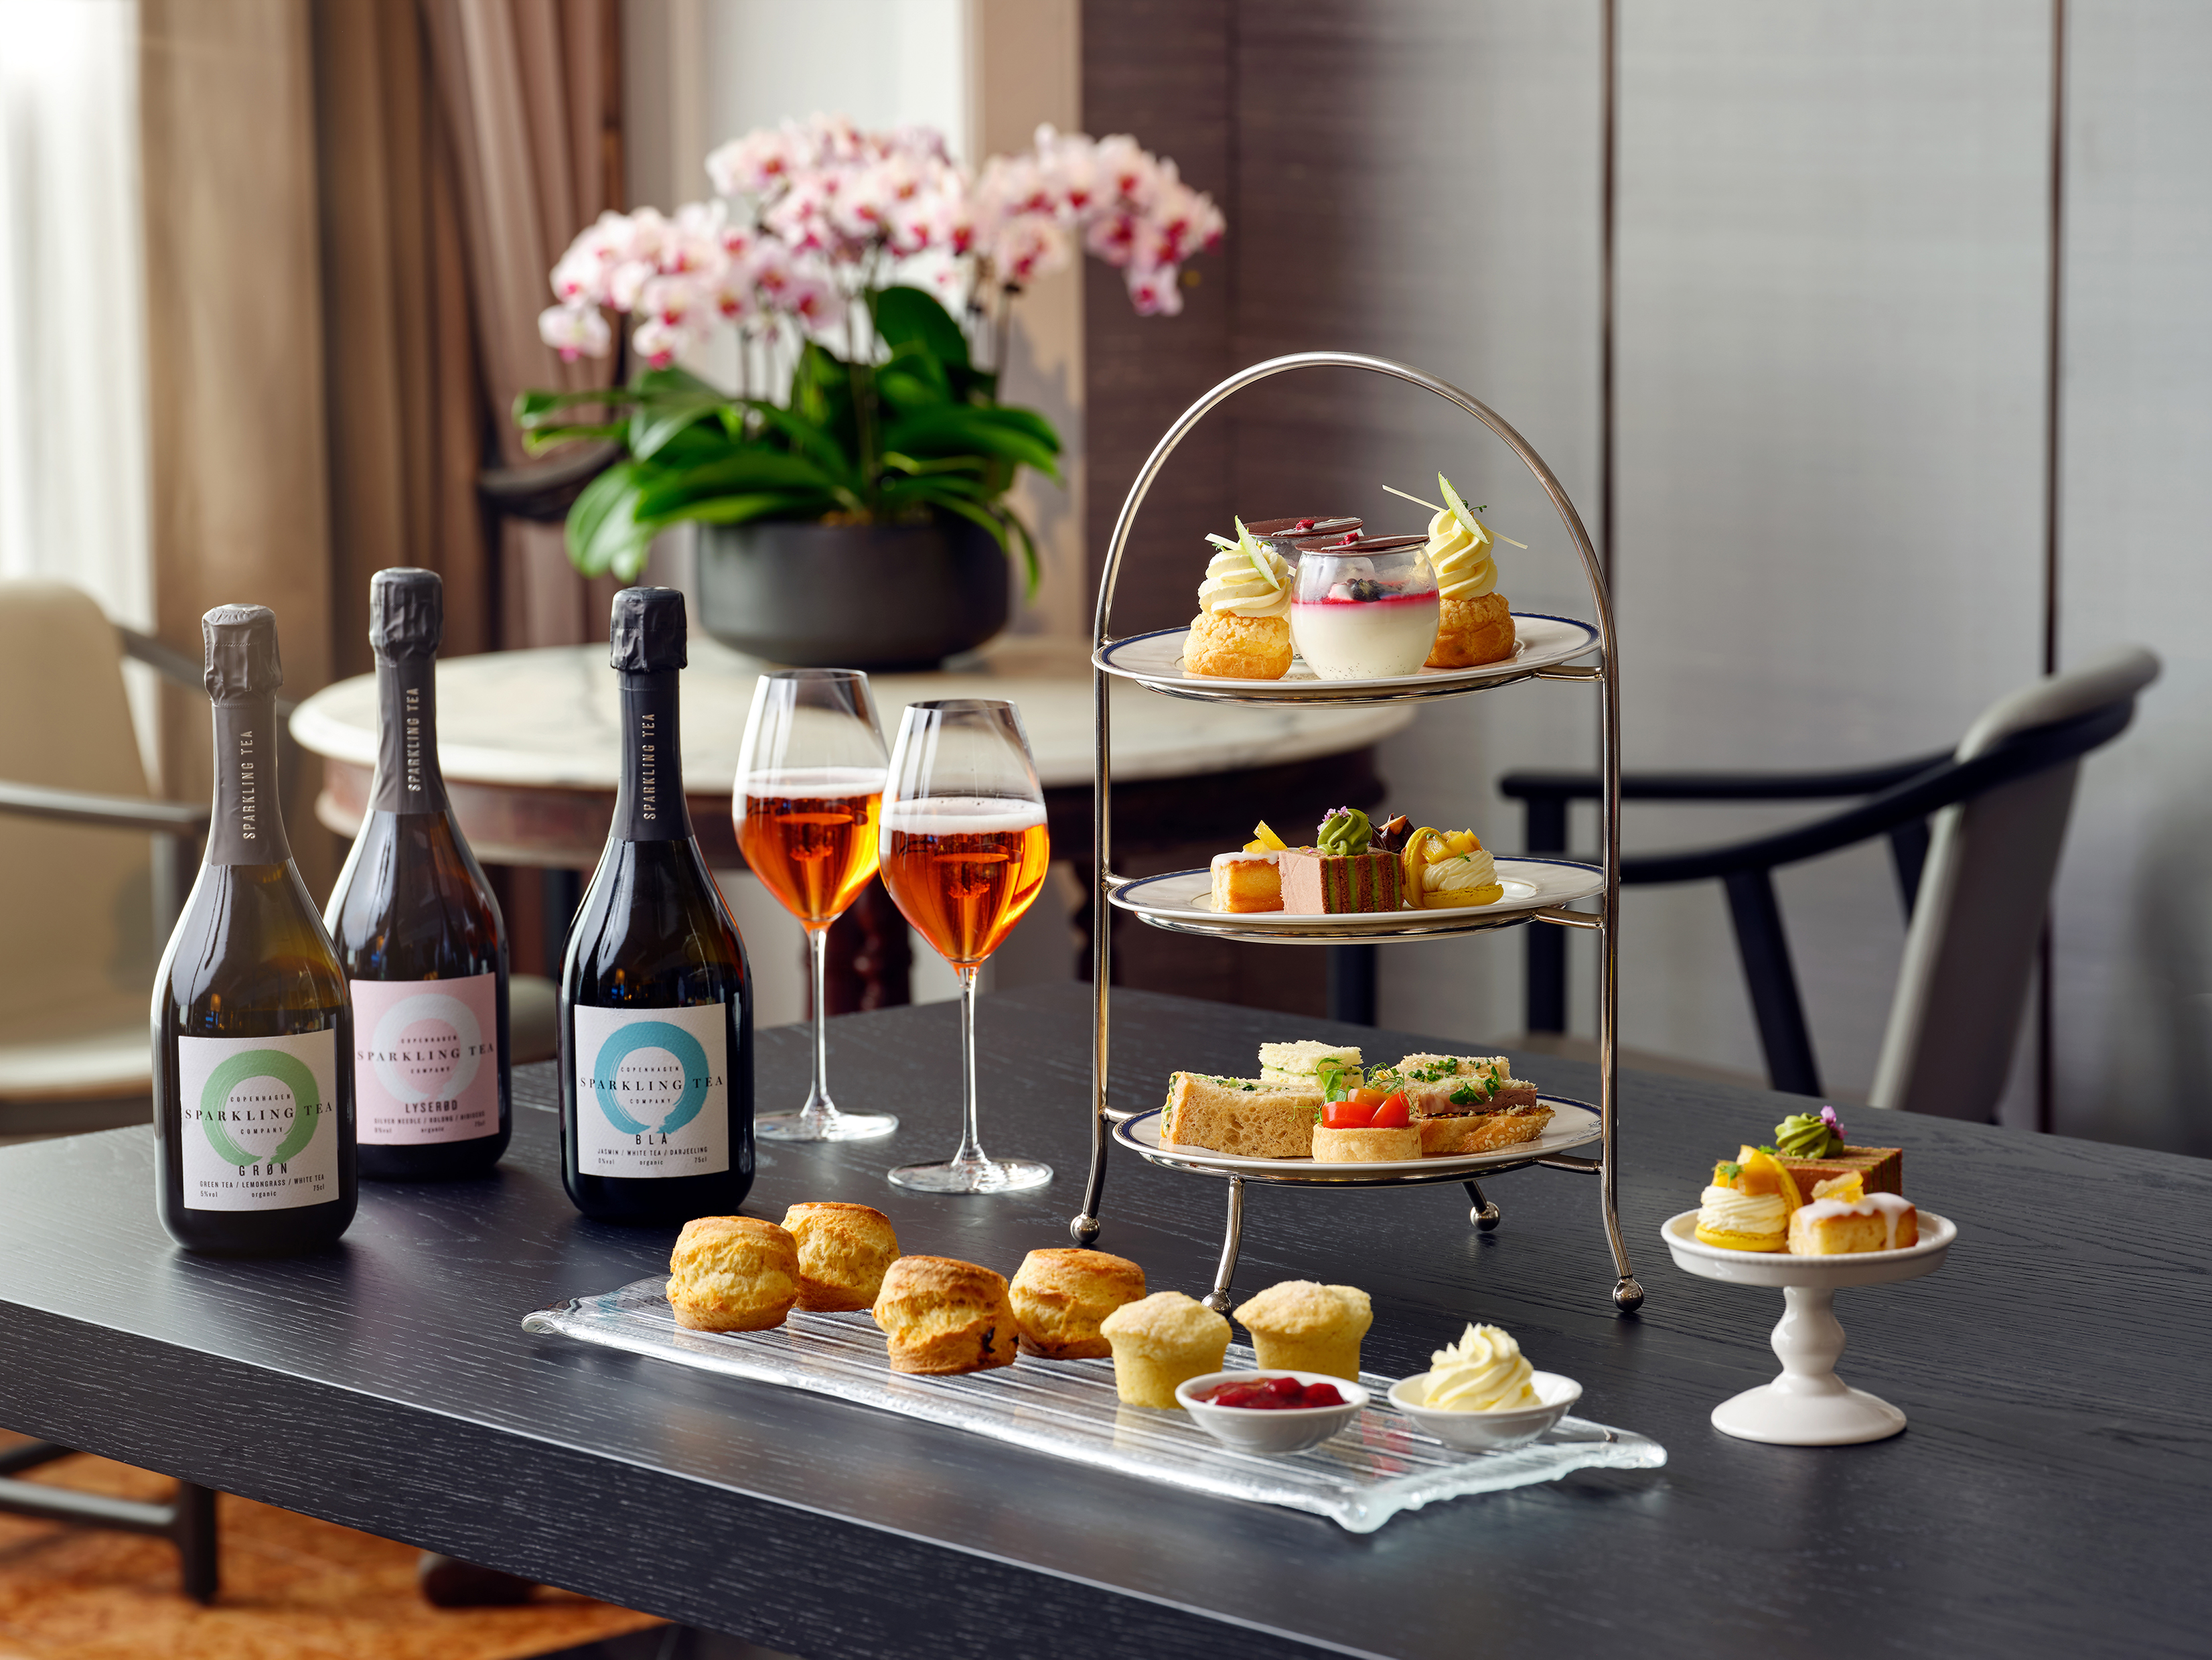 Afternoon Sparkling tea by Four Seasons Hotel Singapore